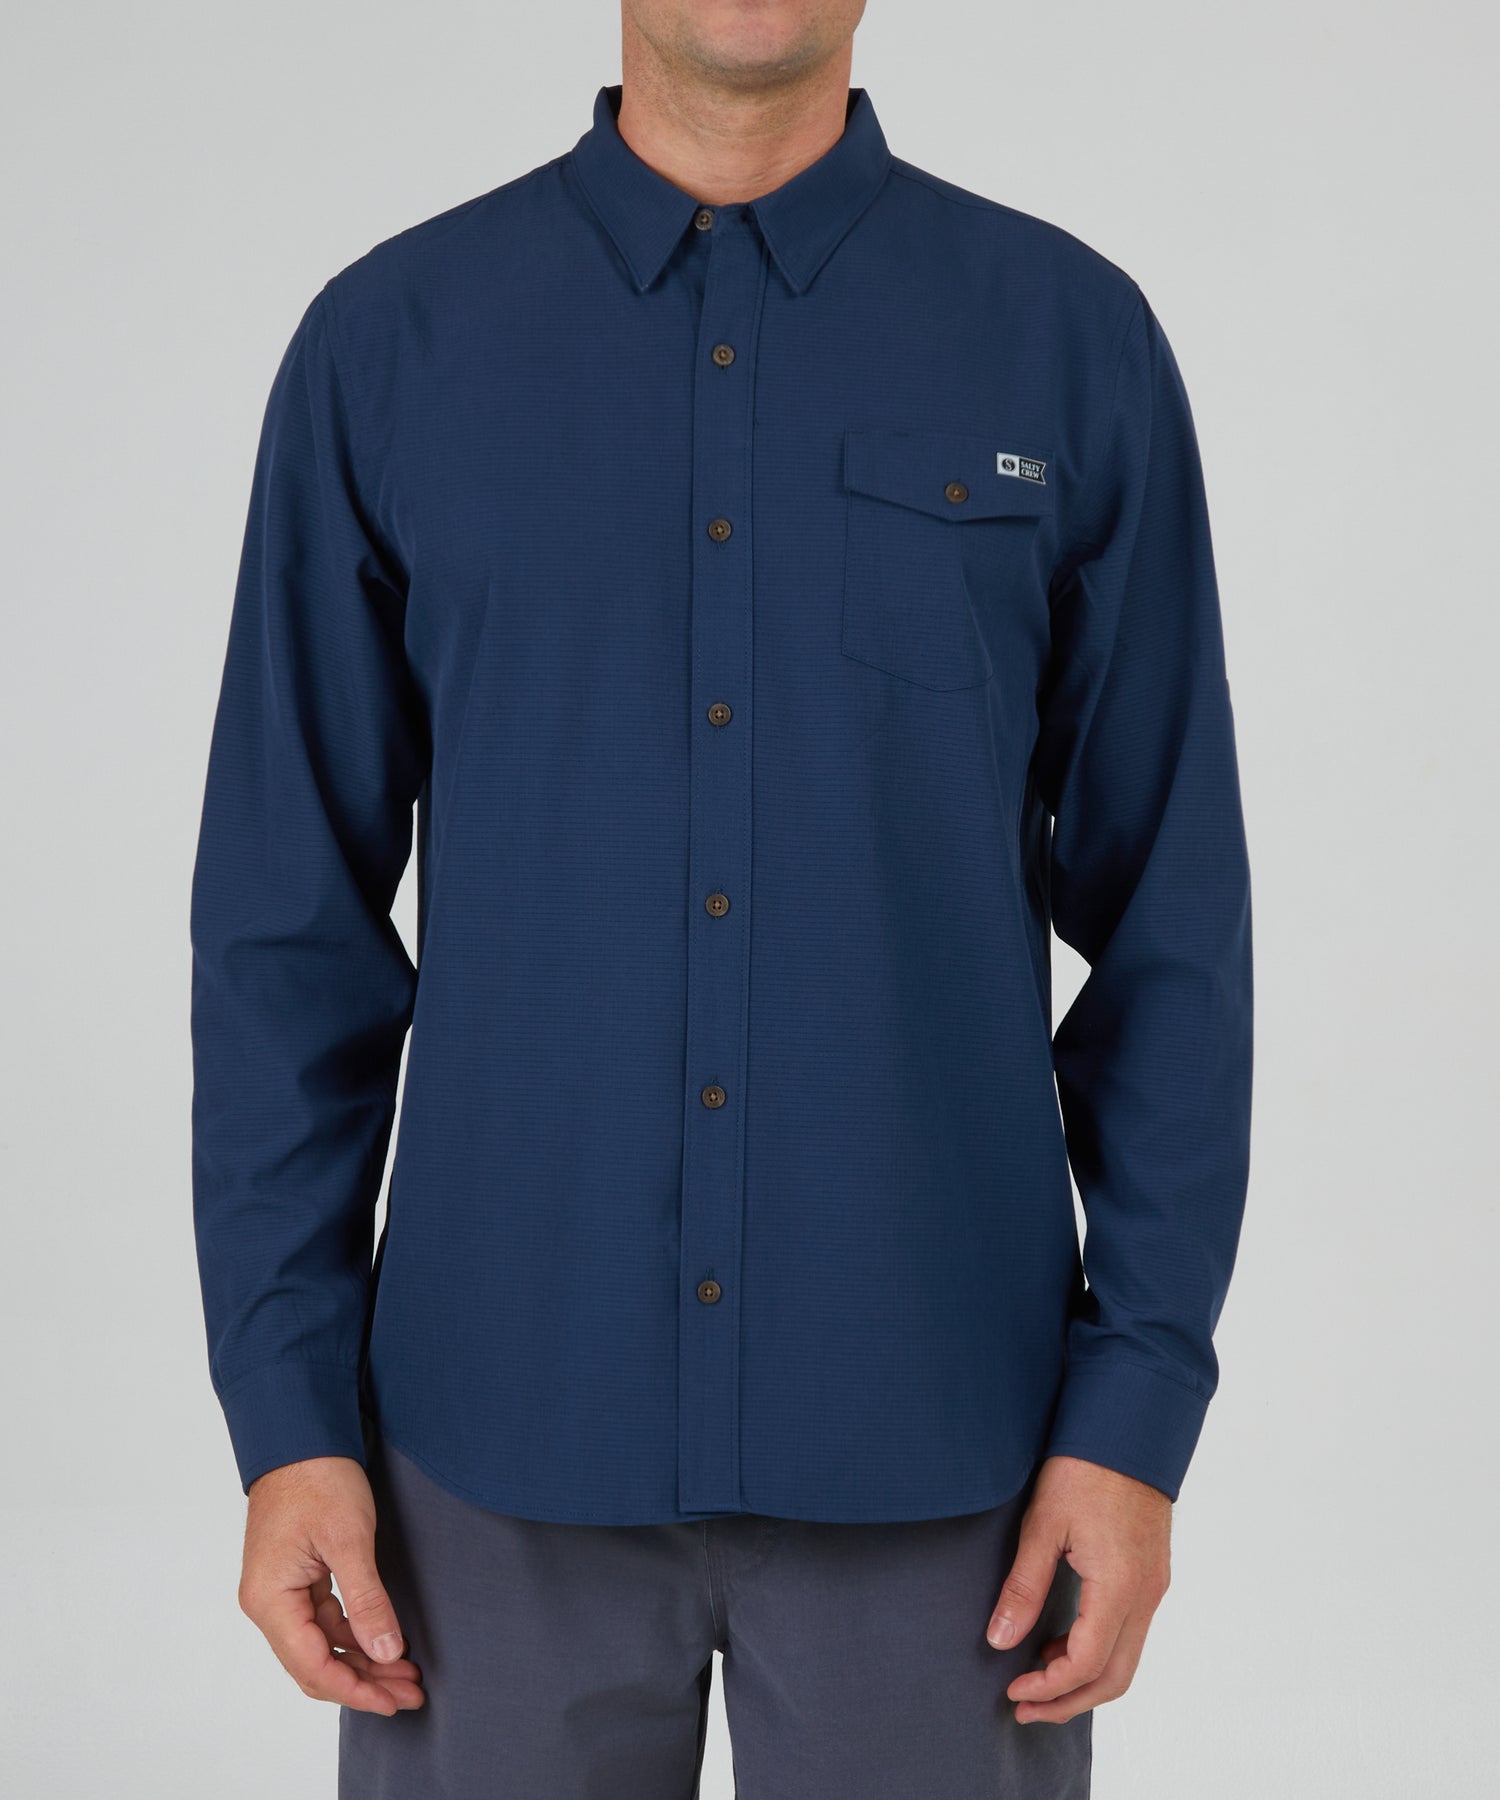 front view of Skipper Perforated Navy L/S Tech Woven